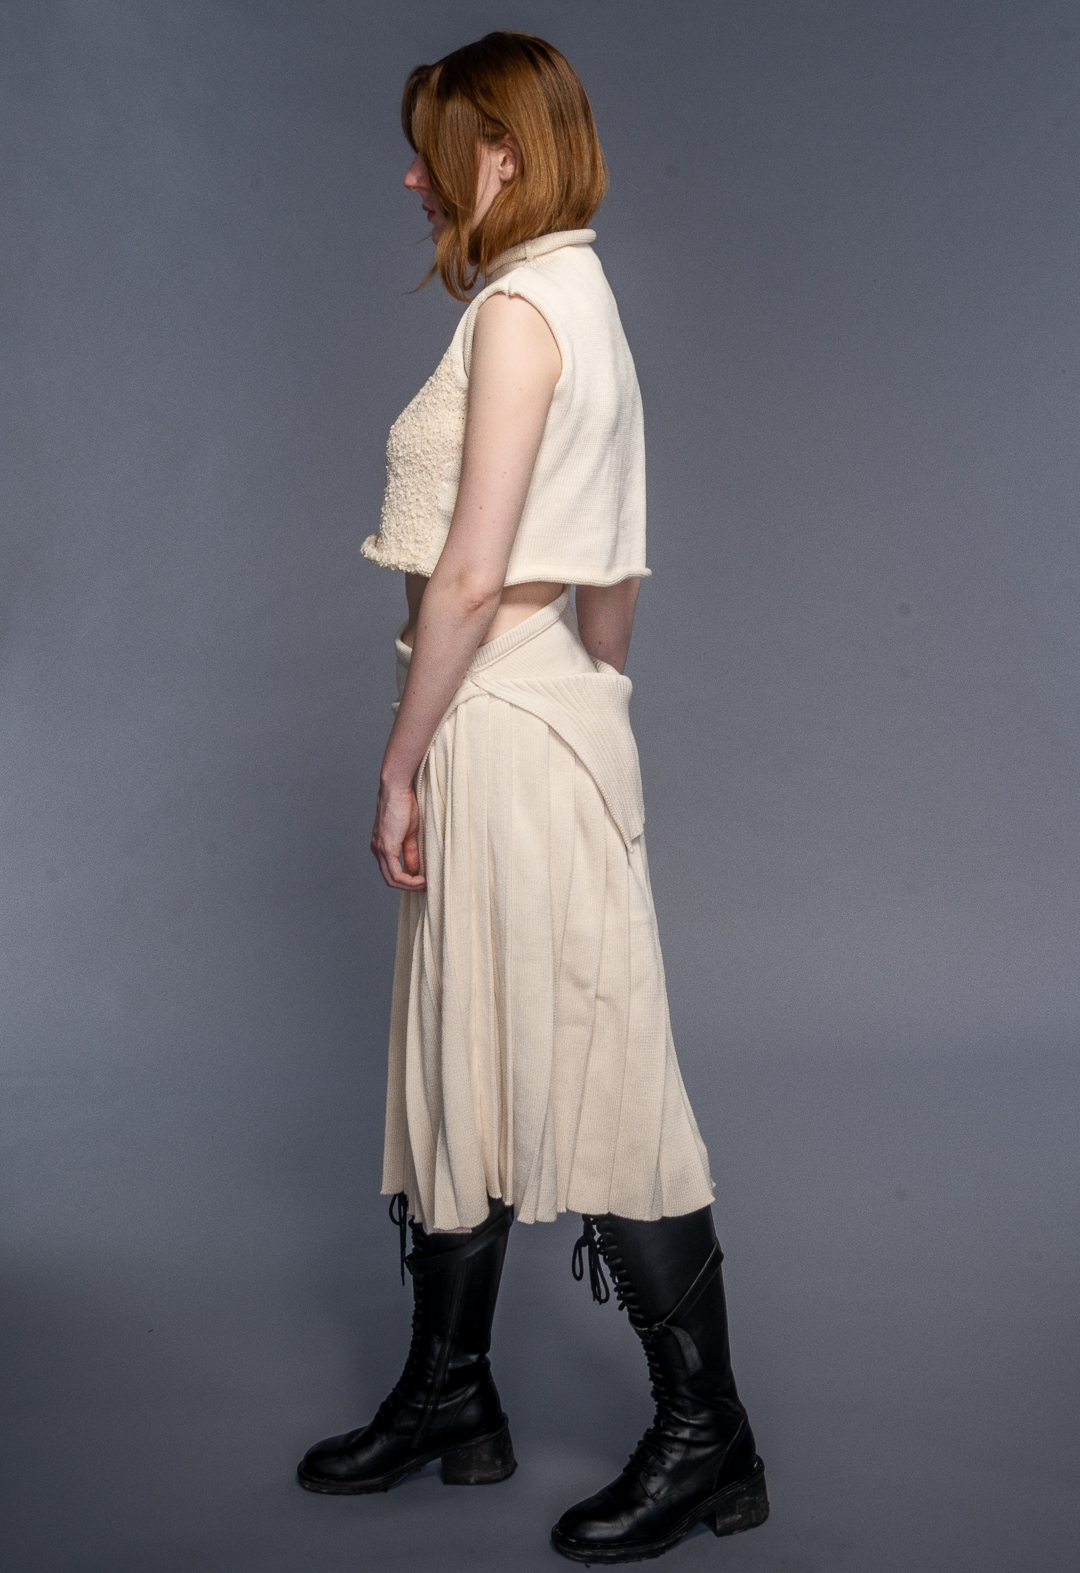 Model wears funnel neck top with misshaped intarsia and irregular pleated skirt in organic cotton. Her hair is tucked in the sweater and she is looking to the right.